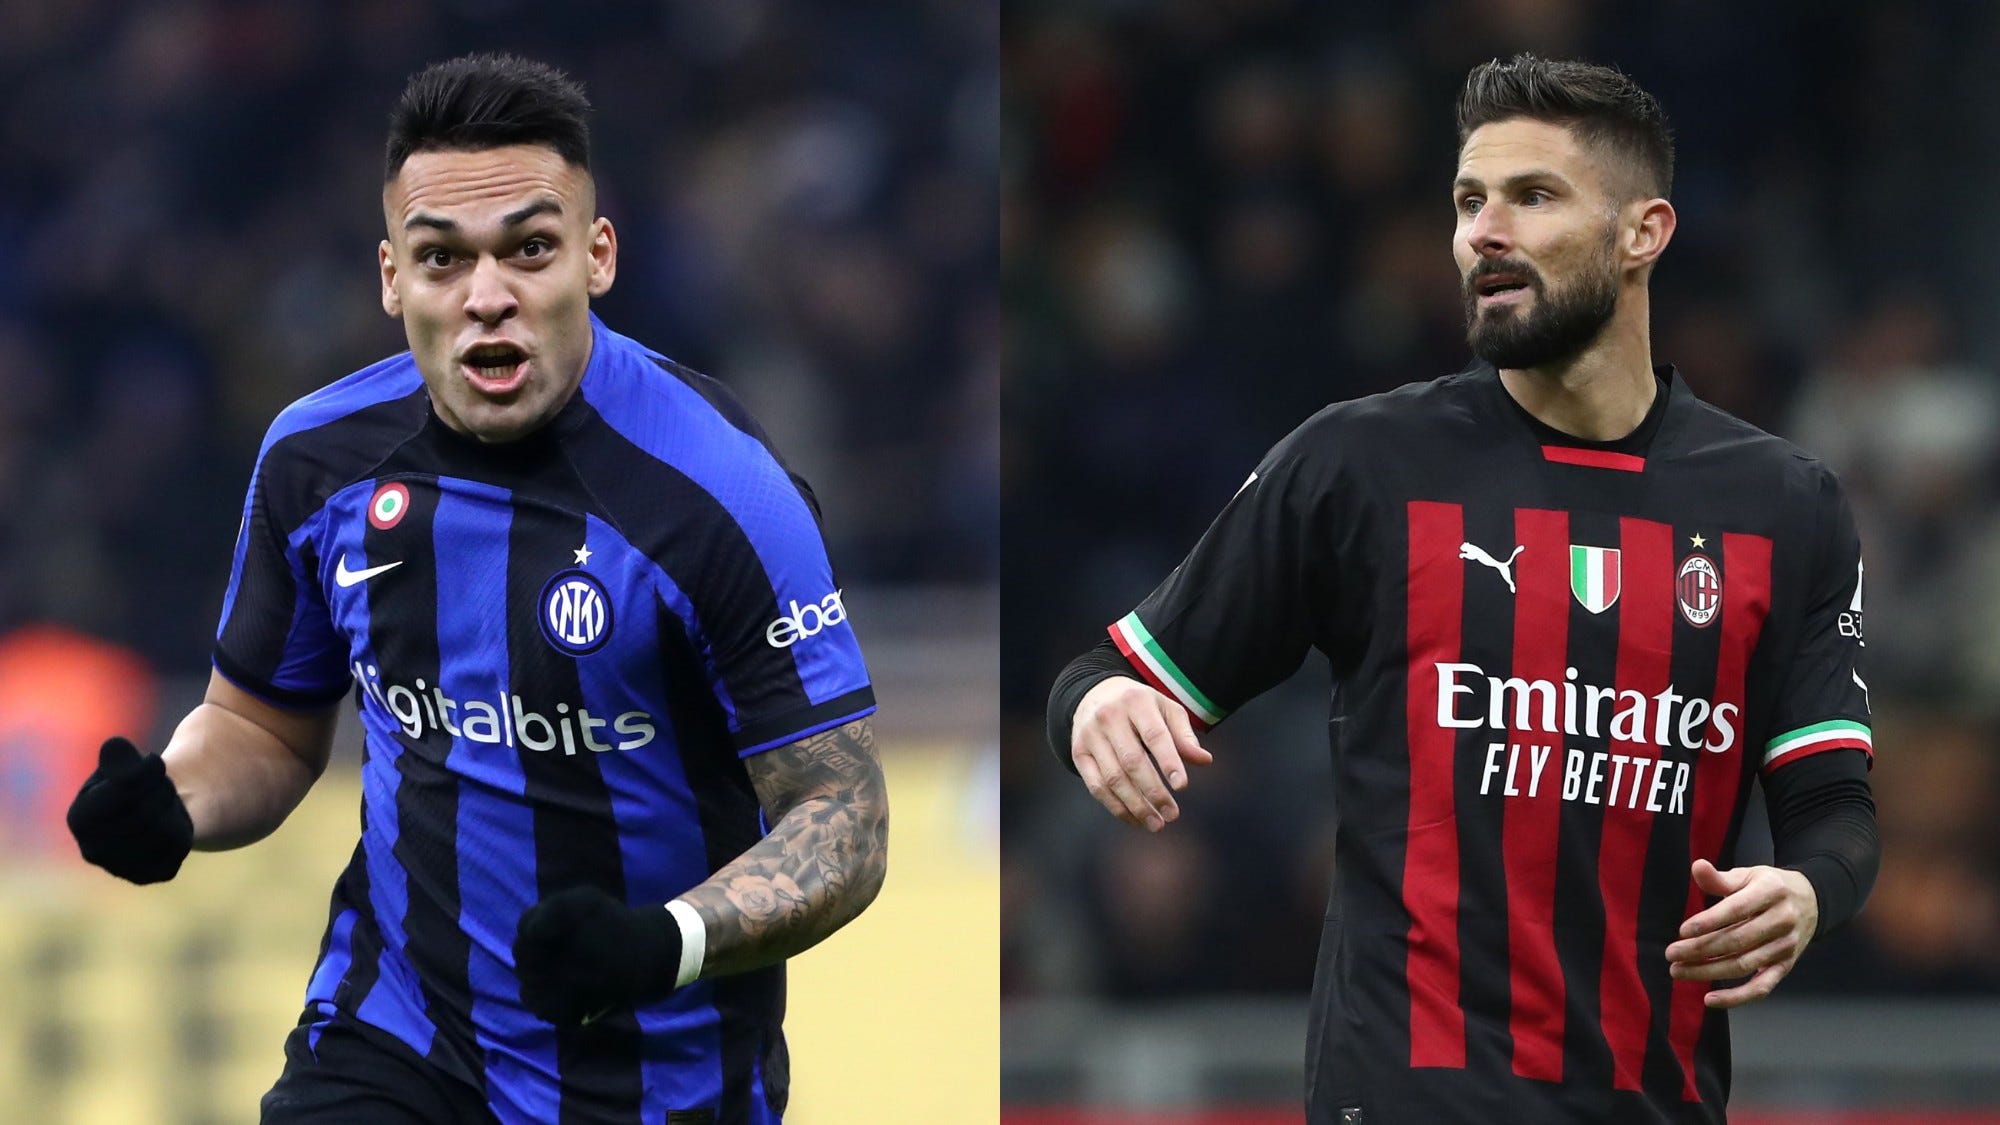 Inter vs AC Milan Live stream, TV channel, kickoff time & where to